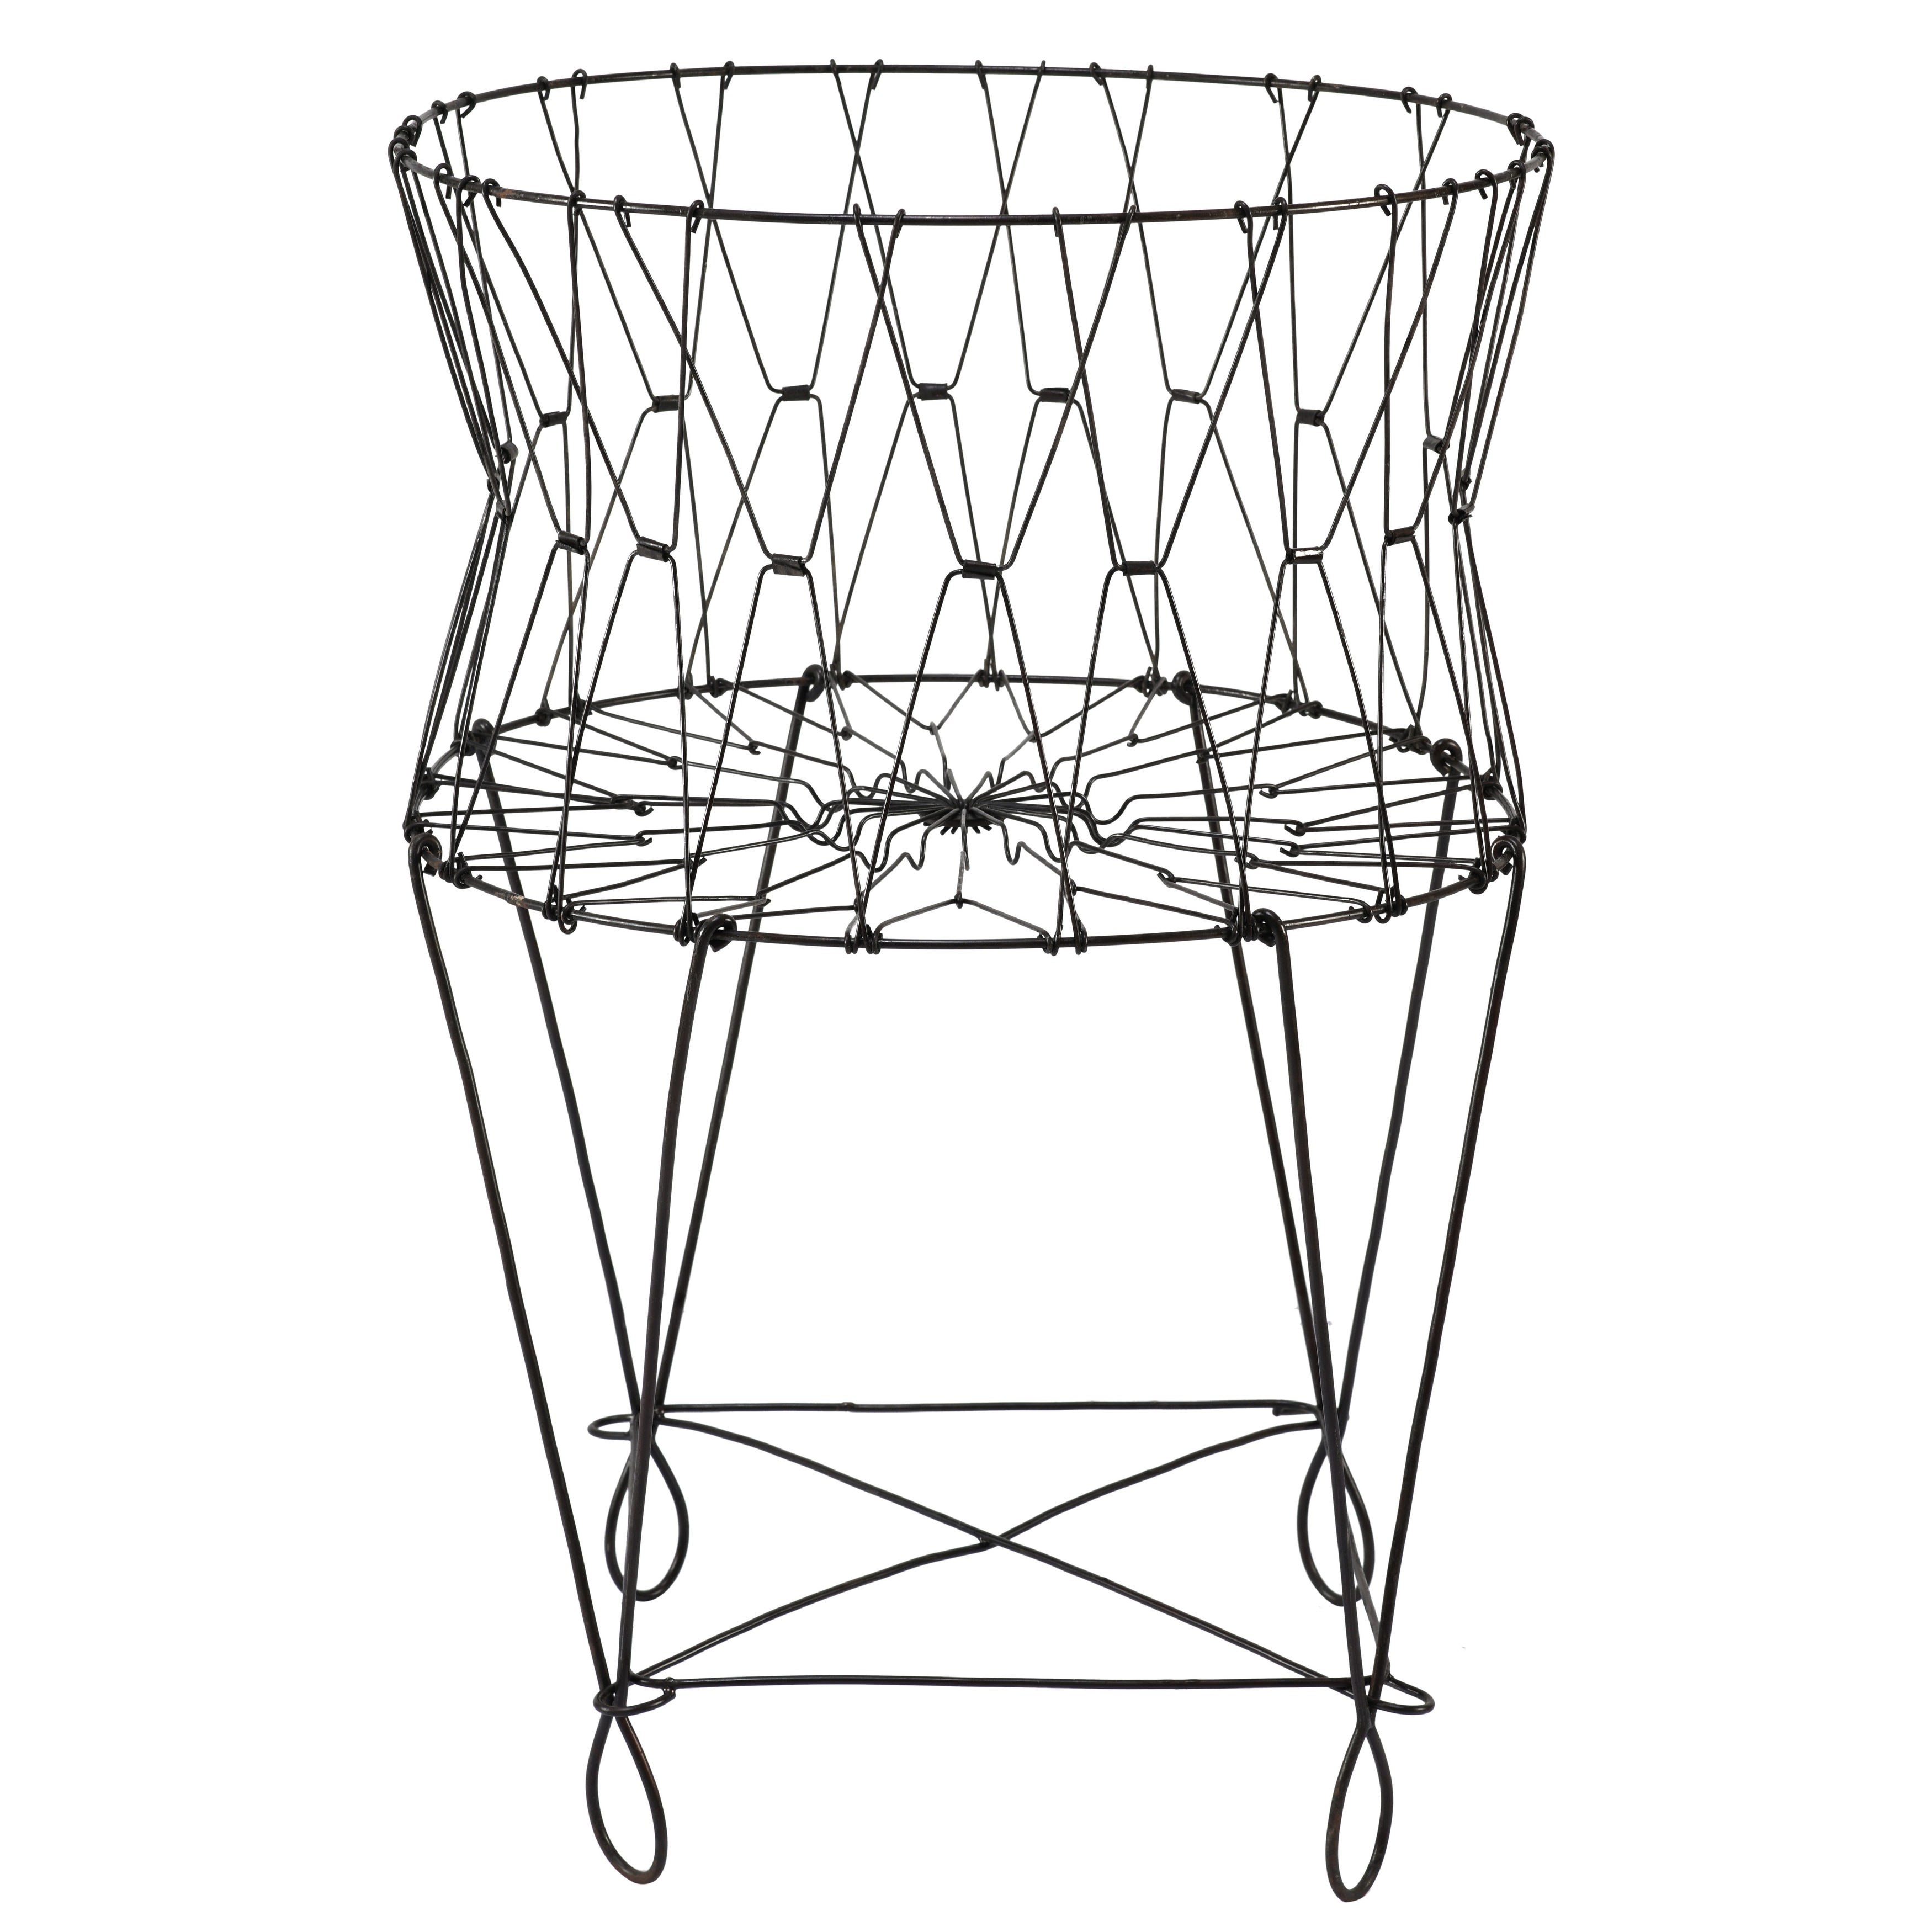 Durable Pop up Laundry Basket Wire Hamper With Zipper Close OVERSTOCK SALE !!! 